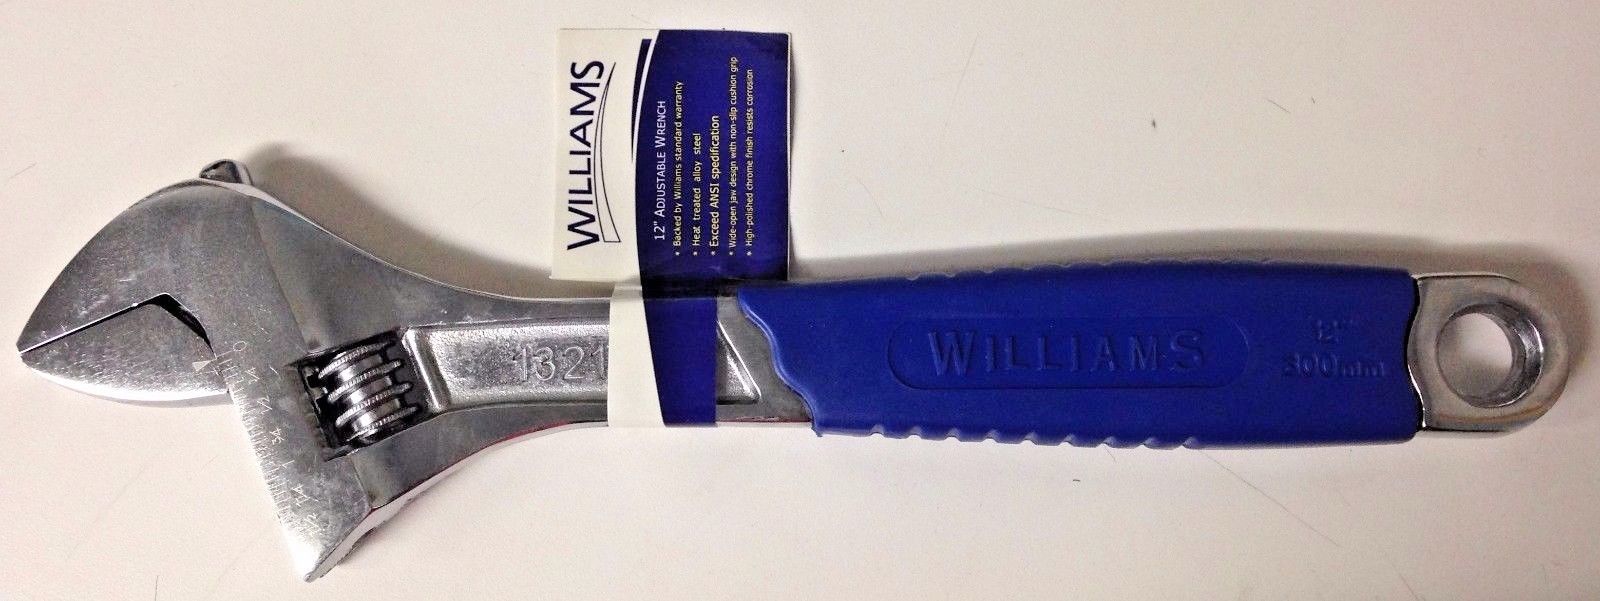 Williams 13212 12" Chrome Adjustable Wrench Comfort Grip